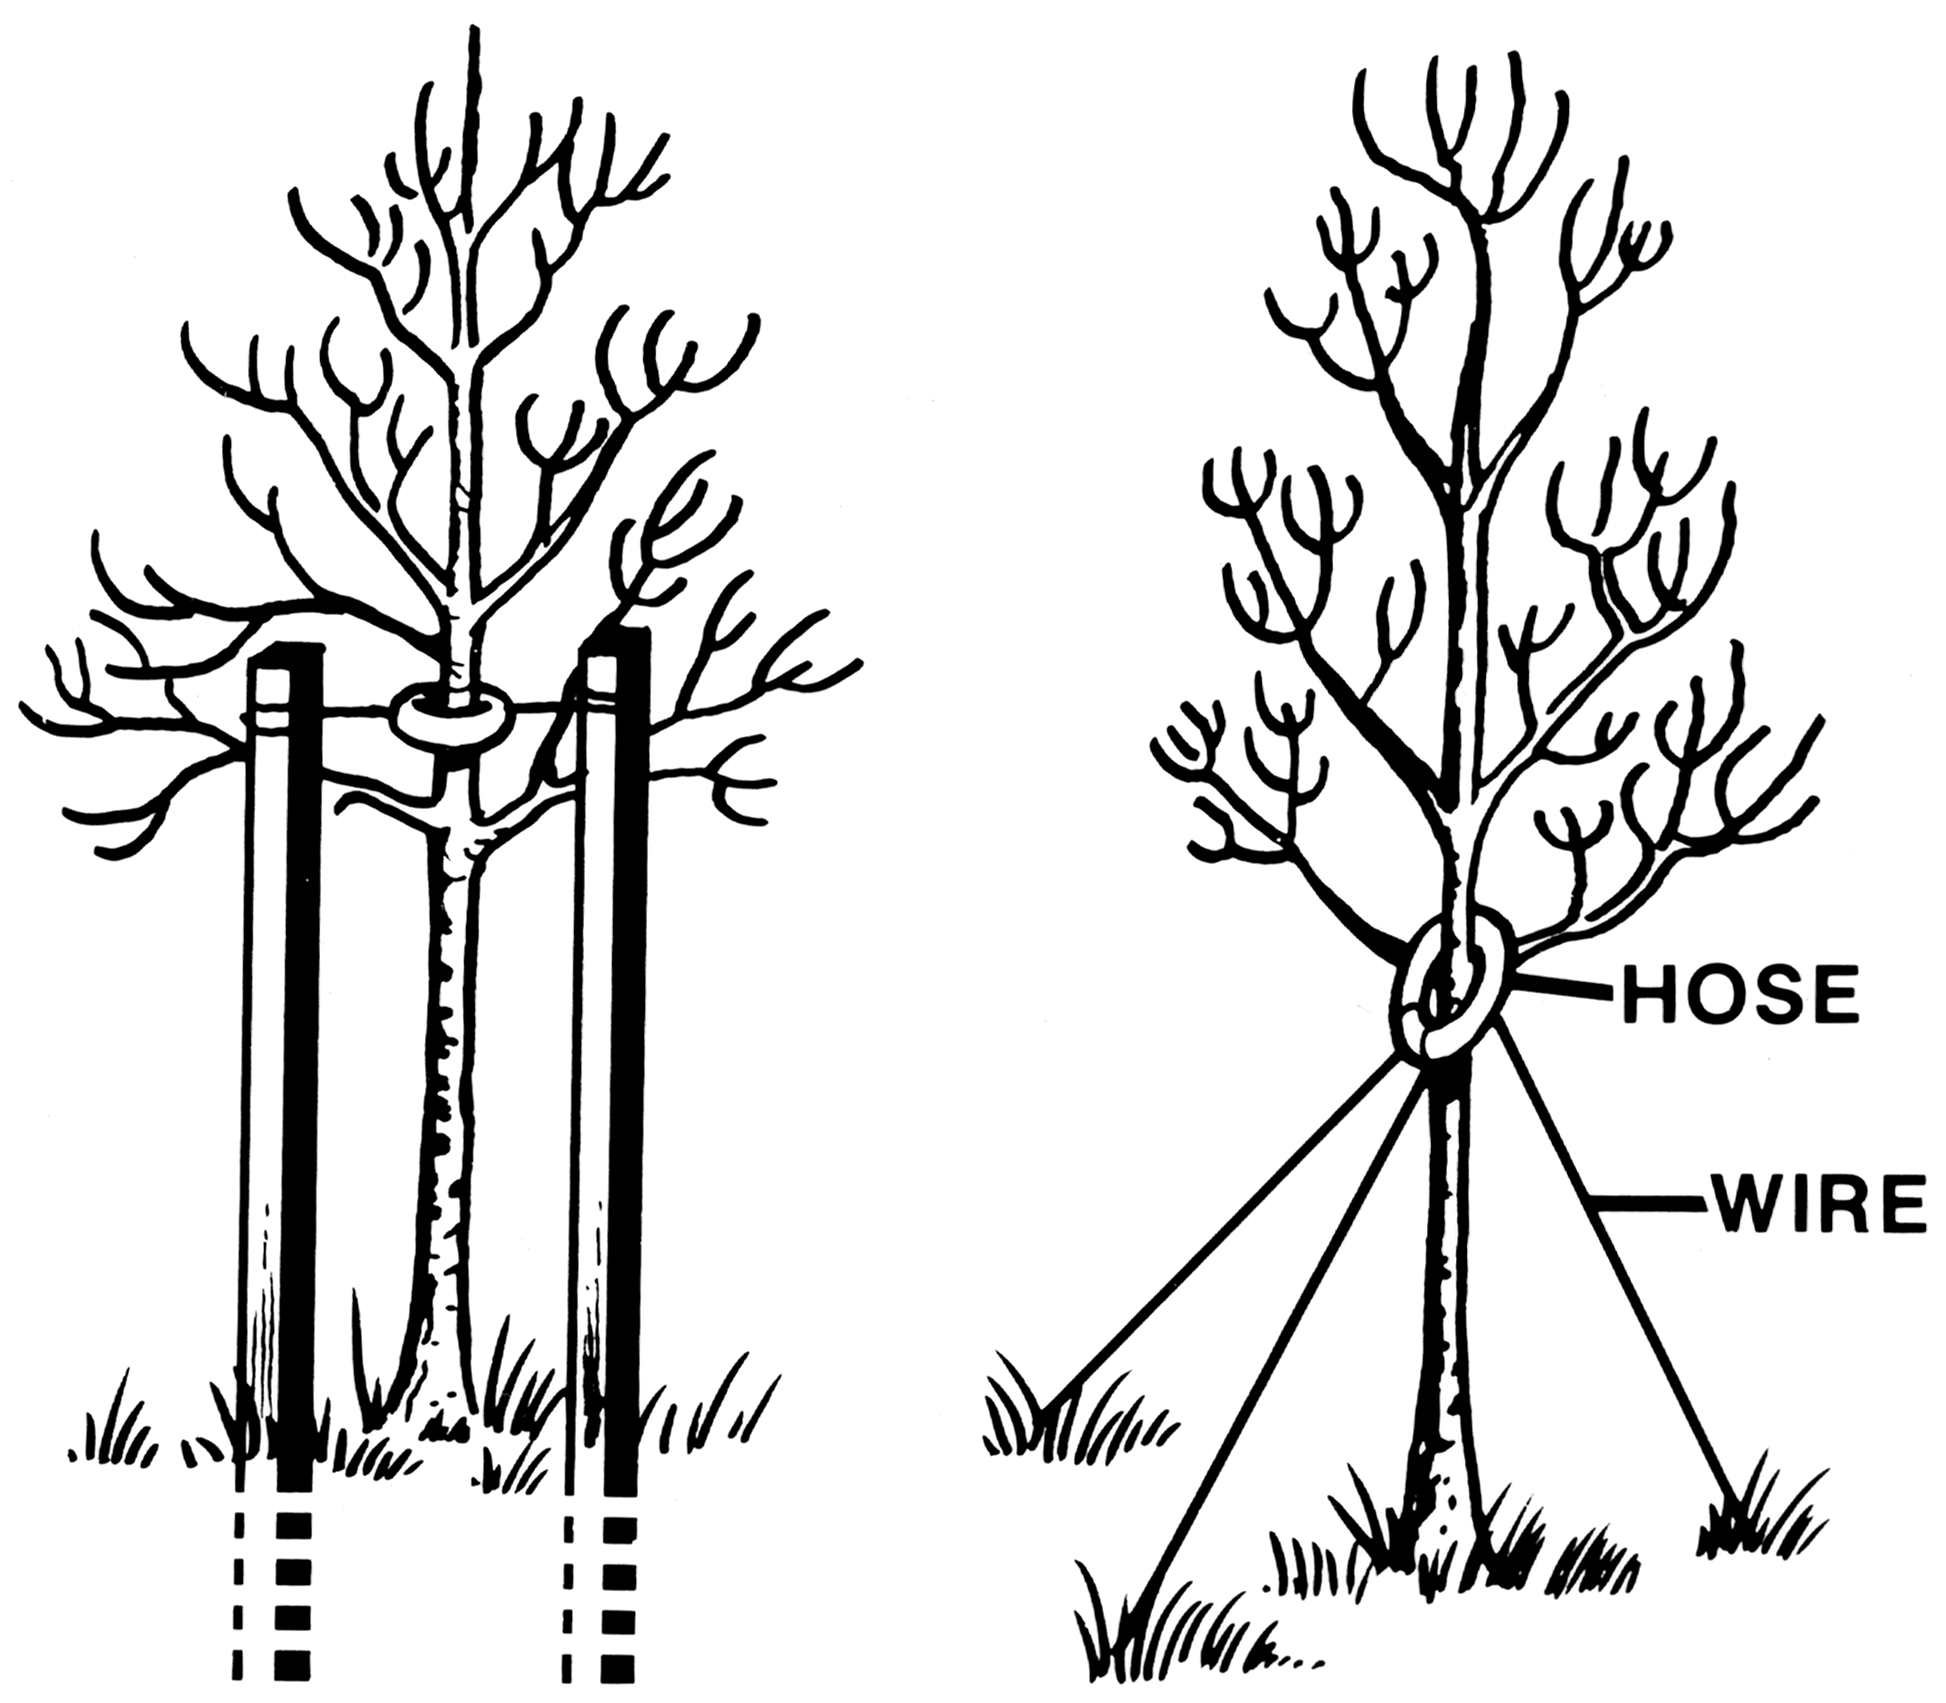 Illustrations of trees with stalking and guying to secure them.